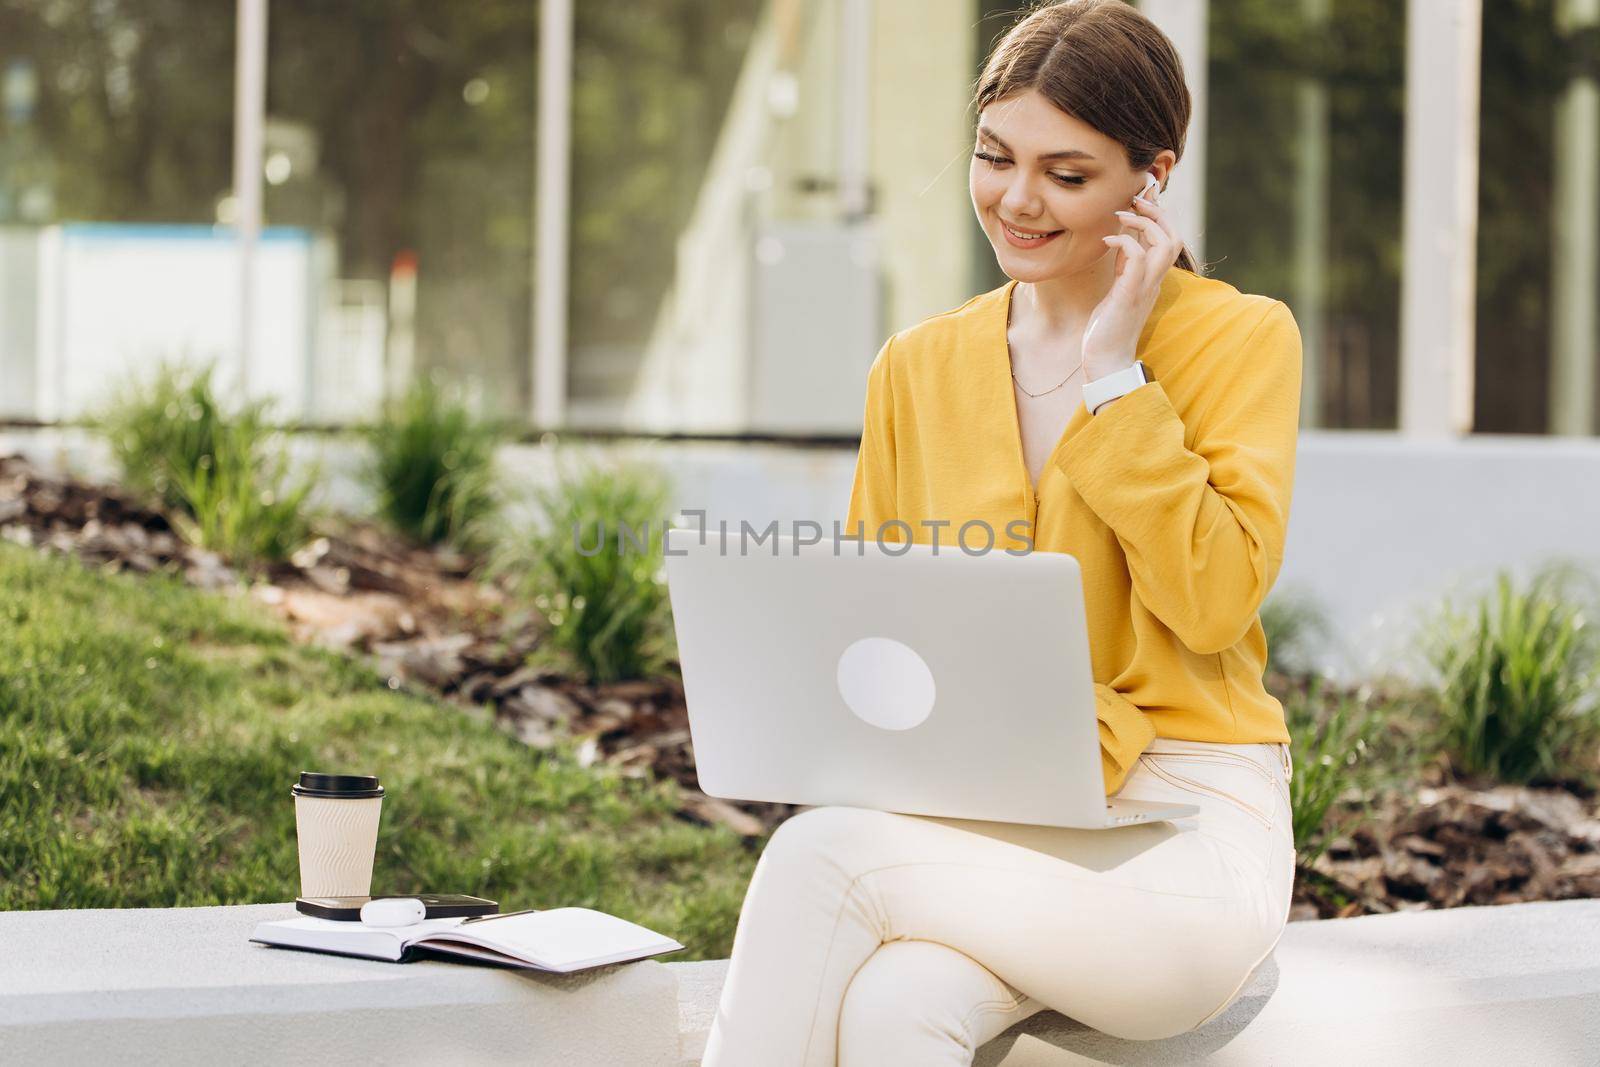 Portrait of attractive woman using laptop in coworking space. Young woman wearing earphones sitting in front open laptop computer and looking ahead. Study, remote work, learning, freelance.